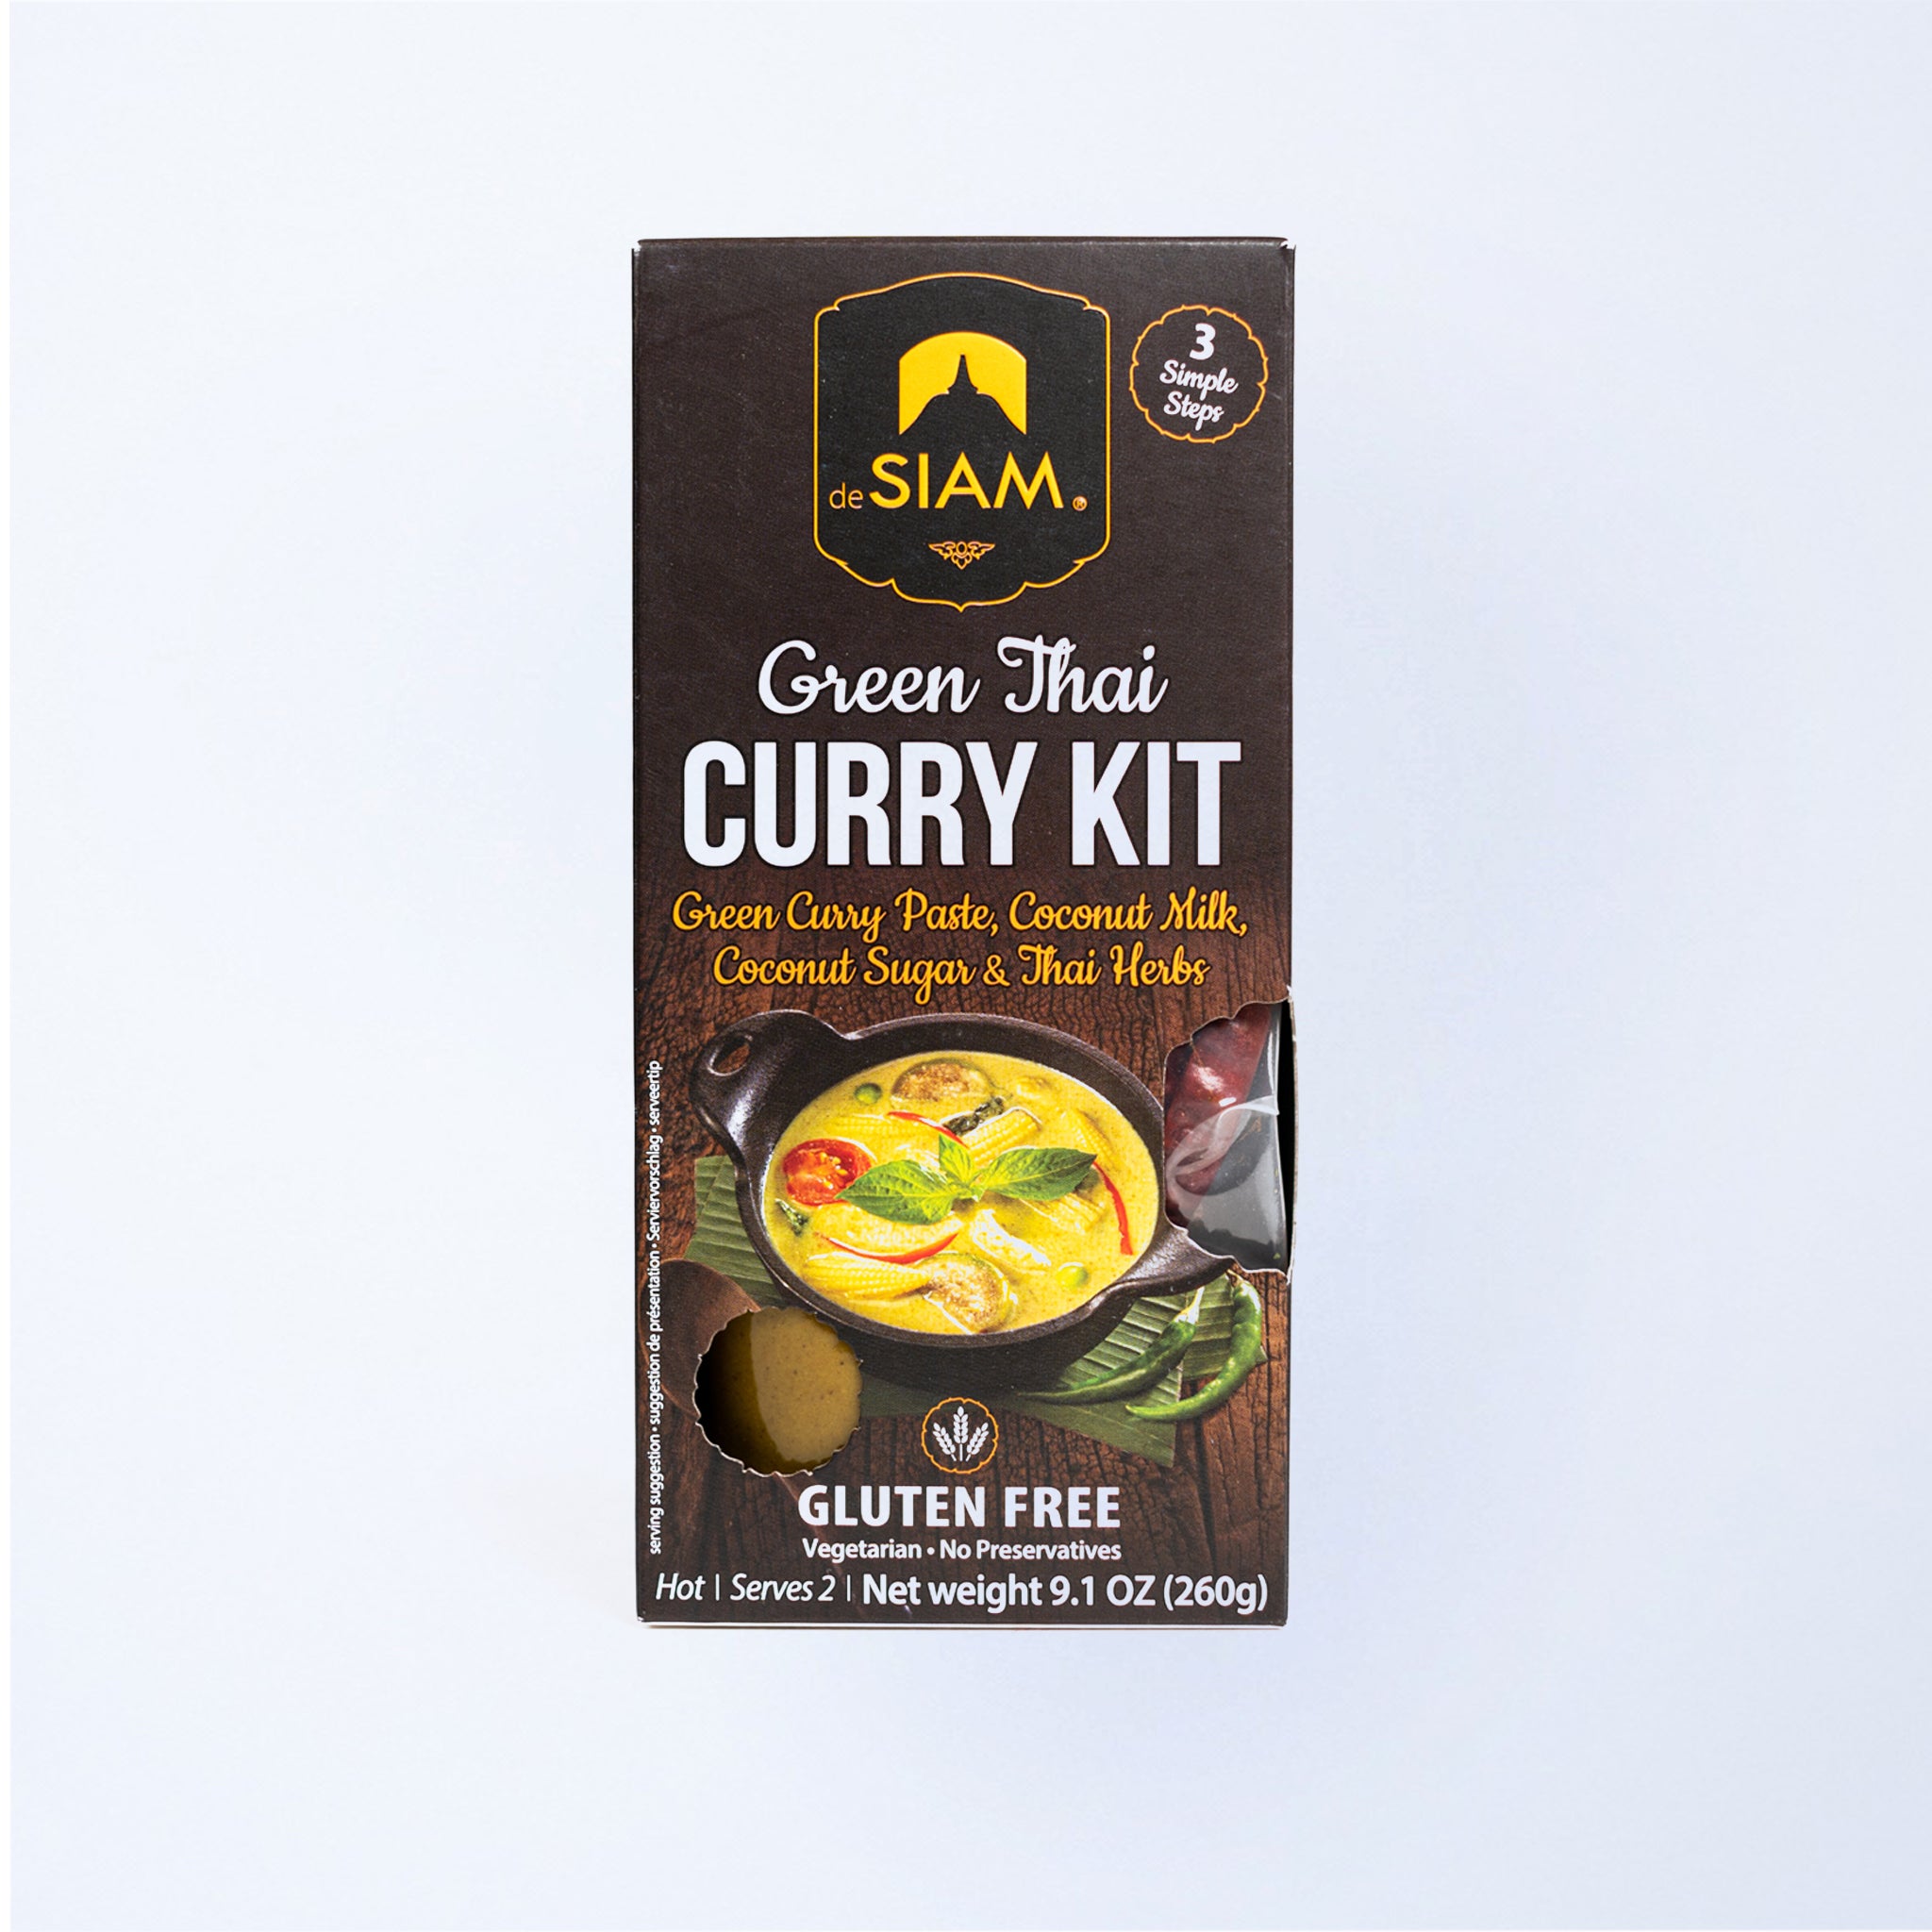 DeSiam Curry Kit 260g